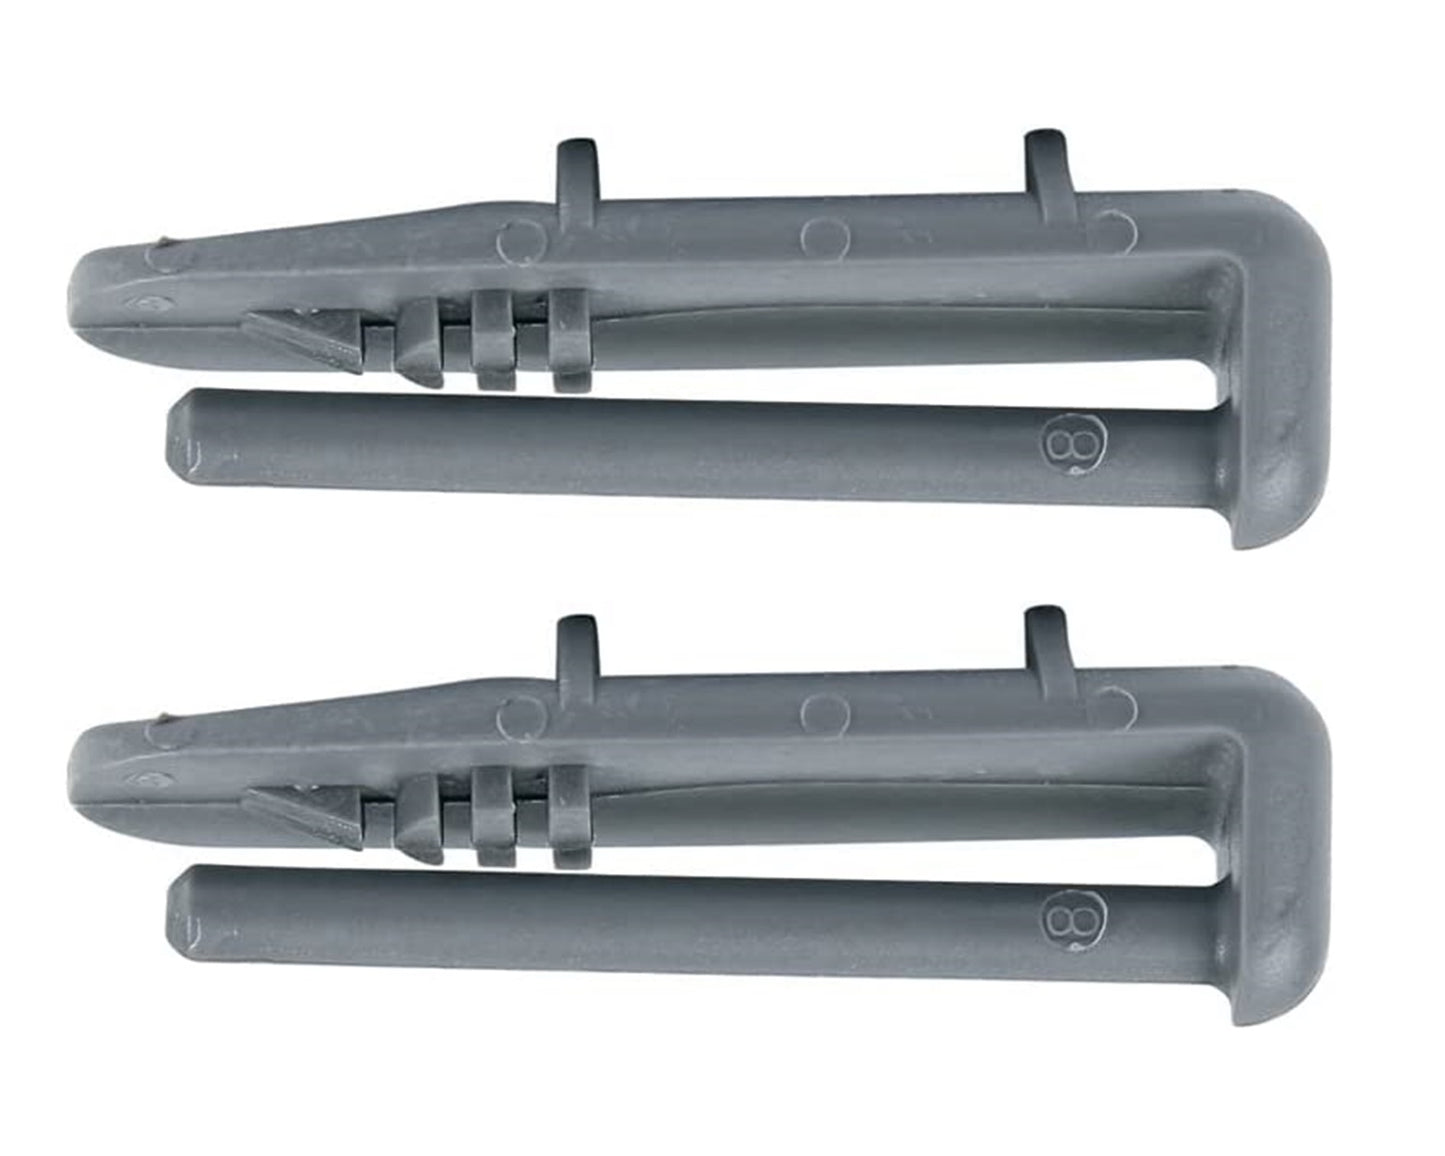 Quality Replacements 2 x To Fit Beko Dishwasher Basket Rail Caps Rear - 1880580300, 1880580400